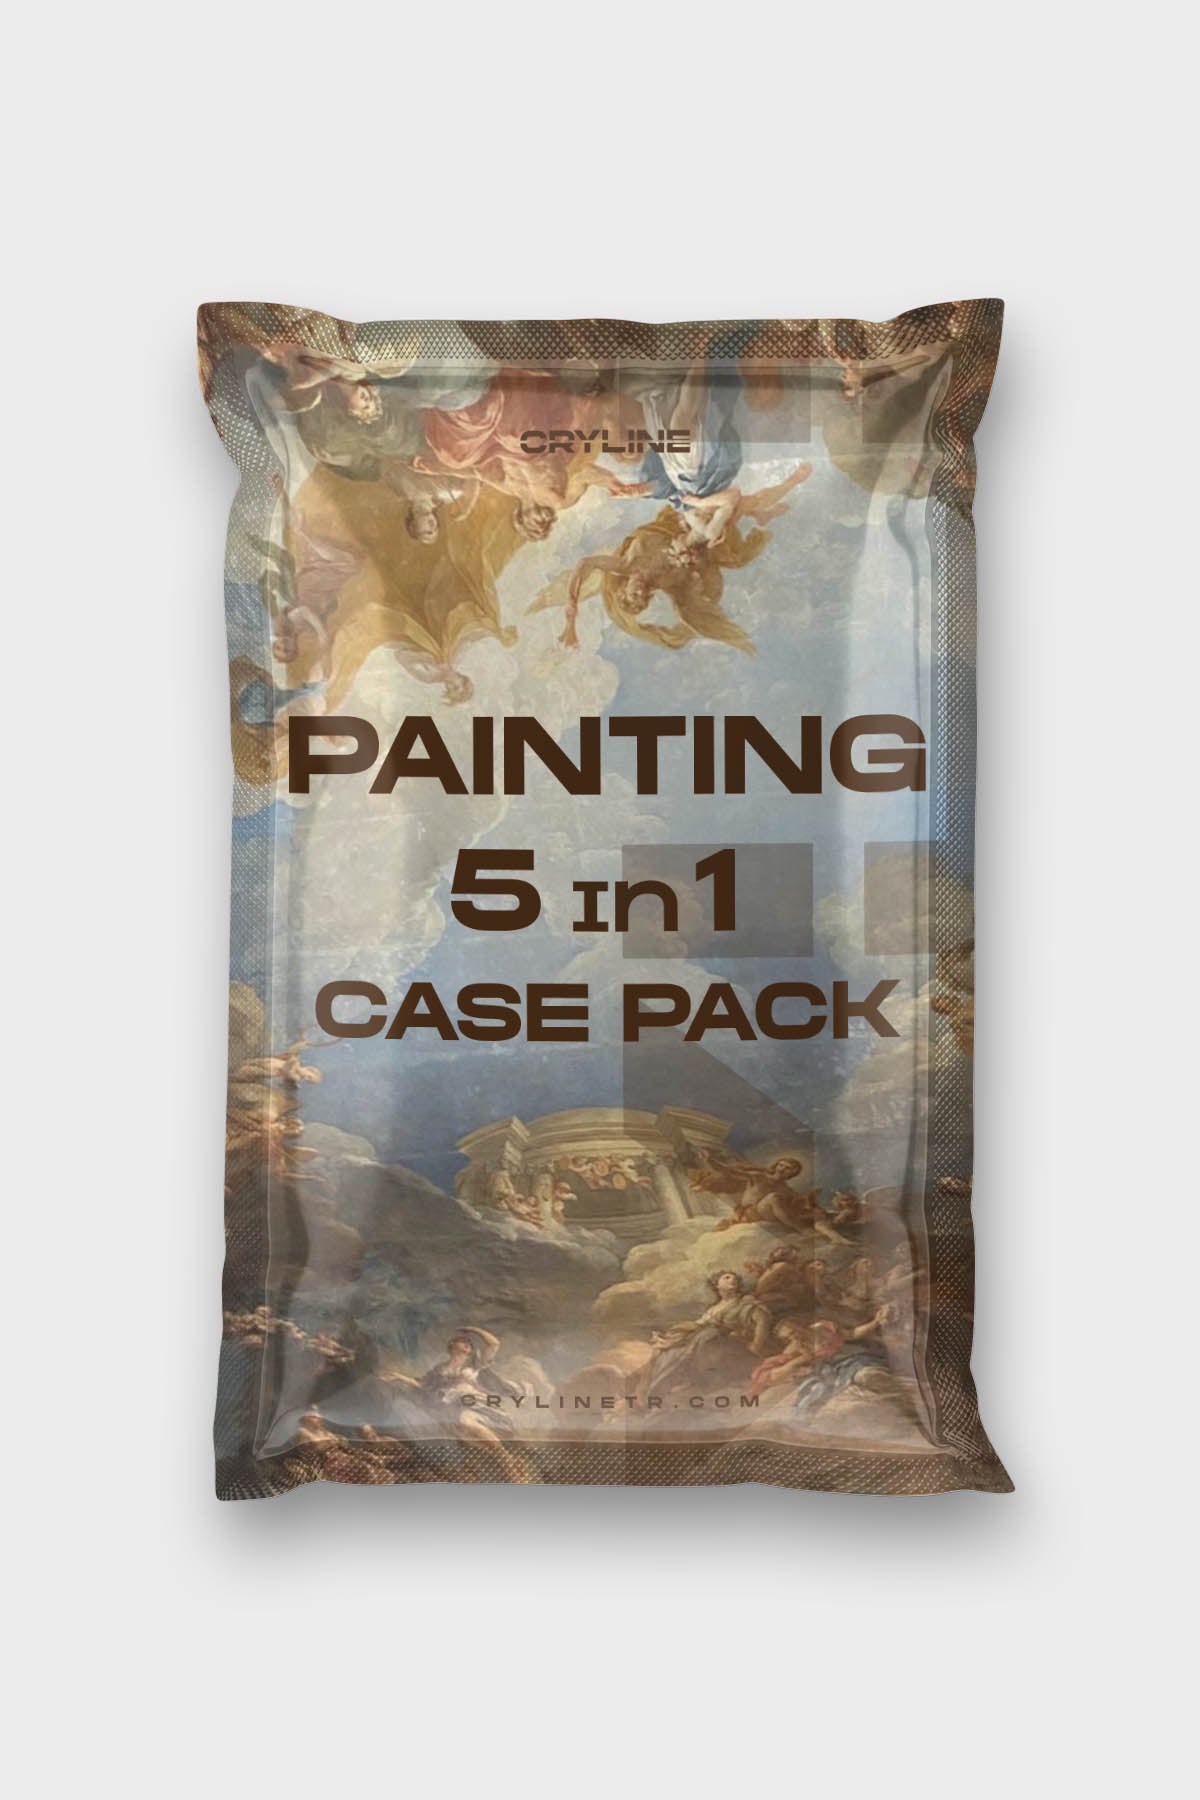 PAINTING 5 in 1 Case Pack